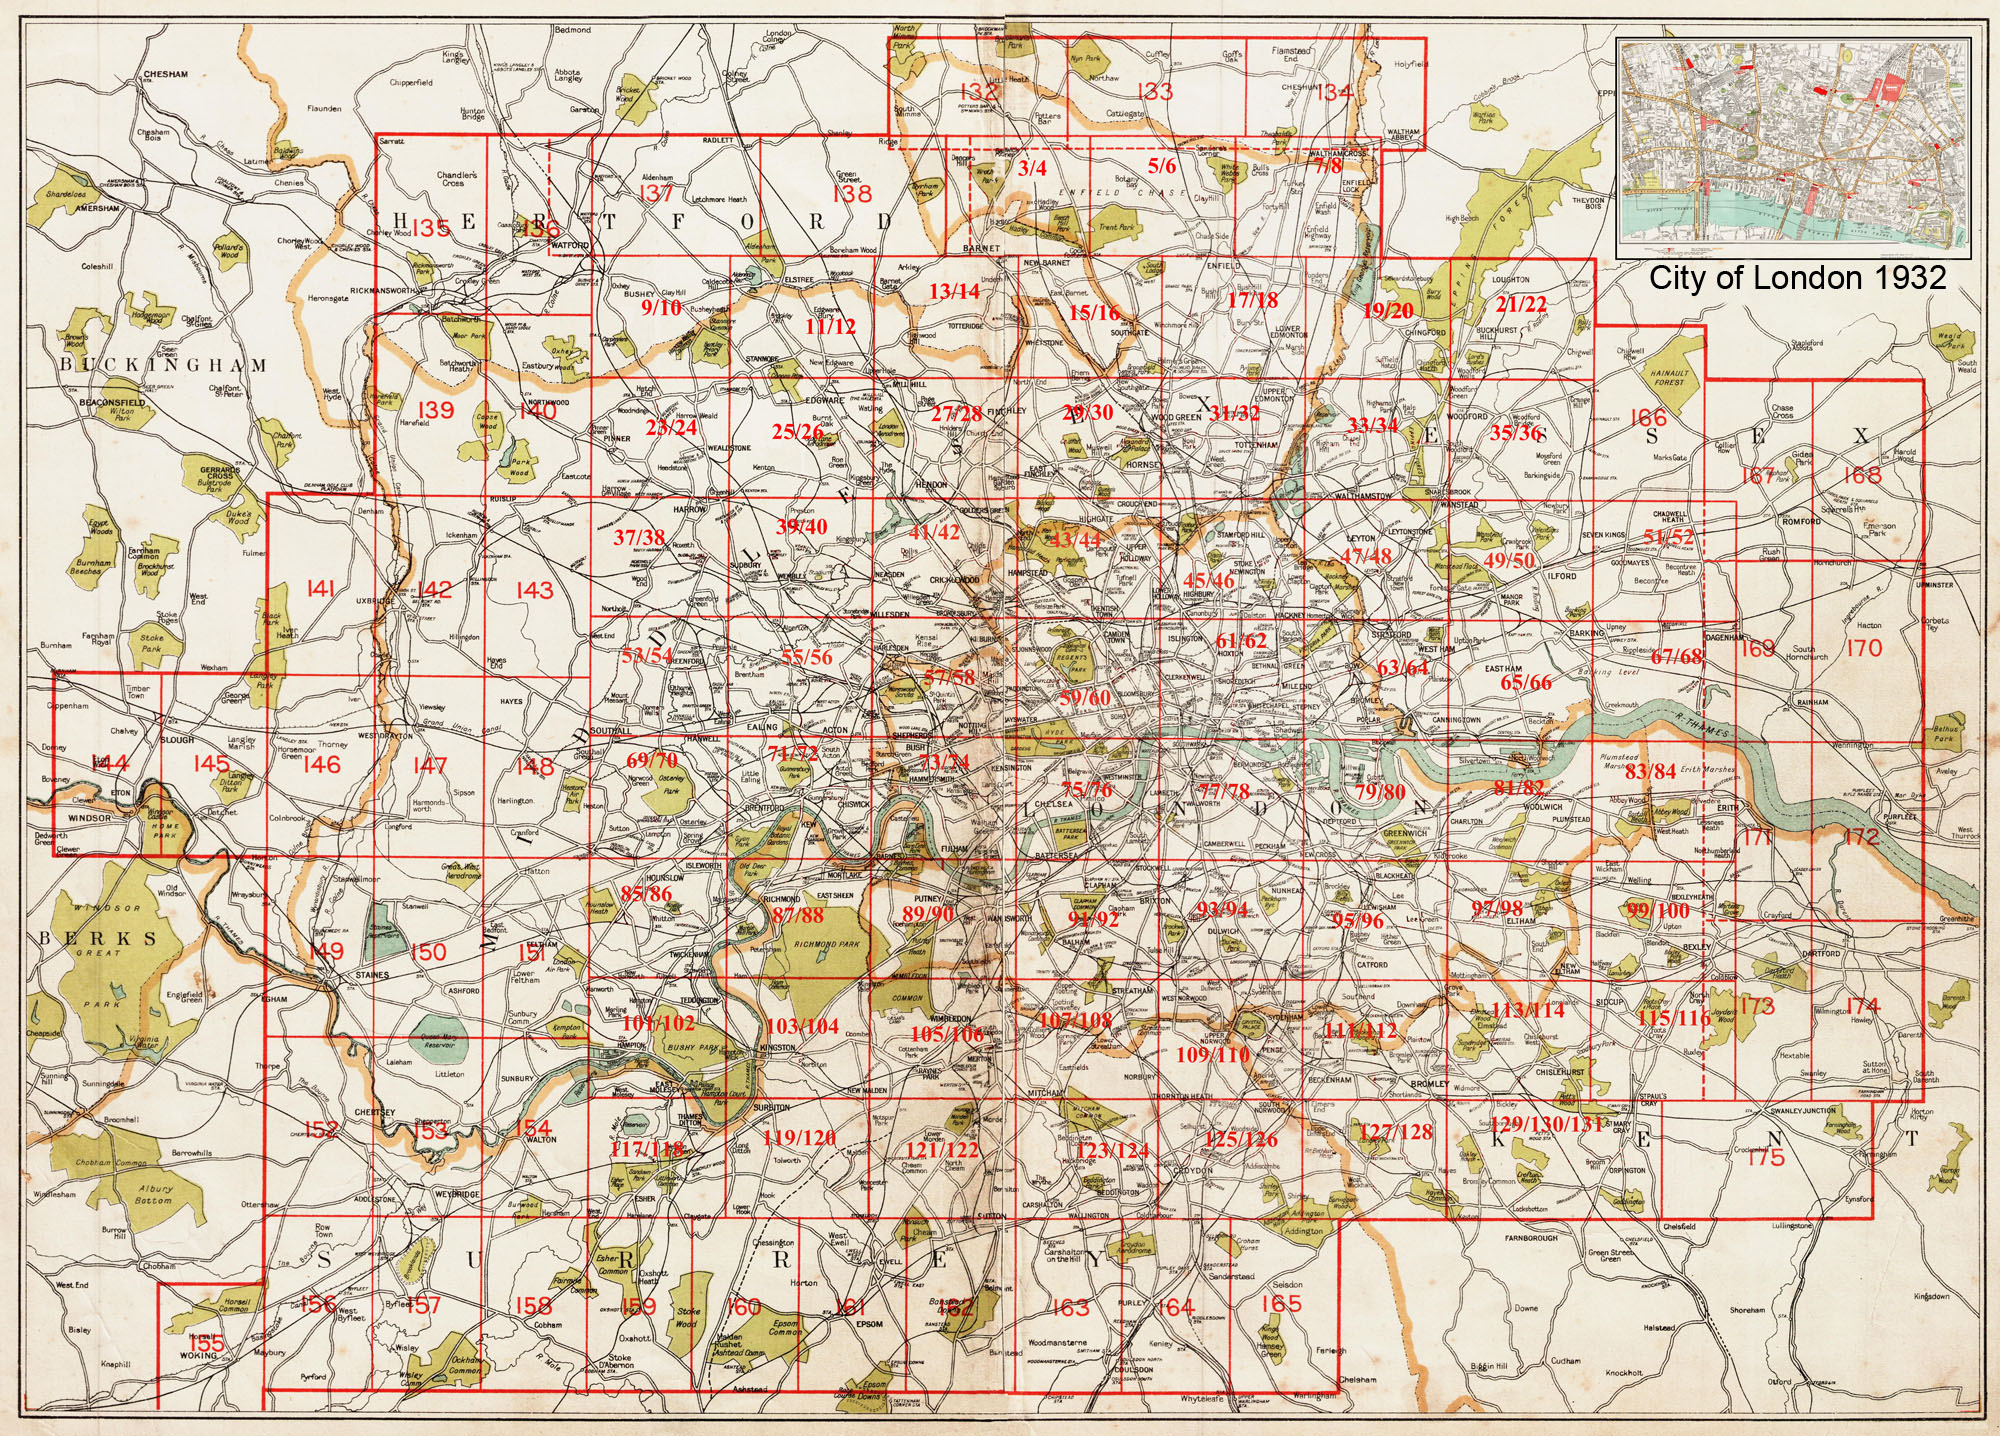 East Finchley Muswell Hill Map London 1932 #29-30 